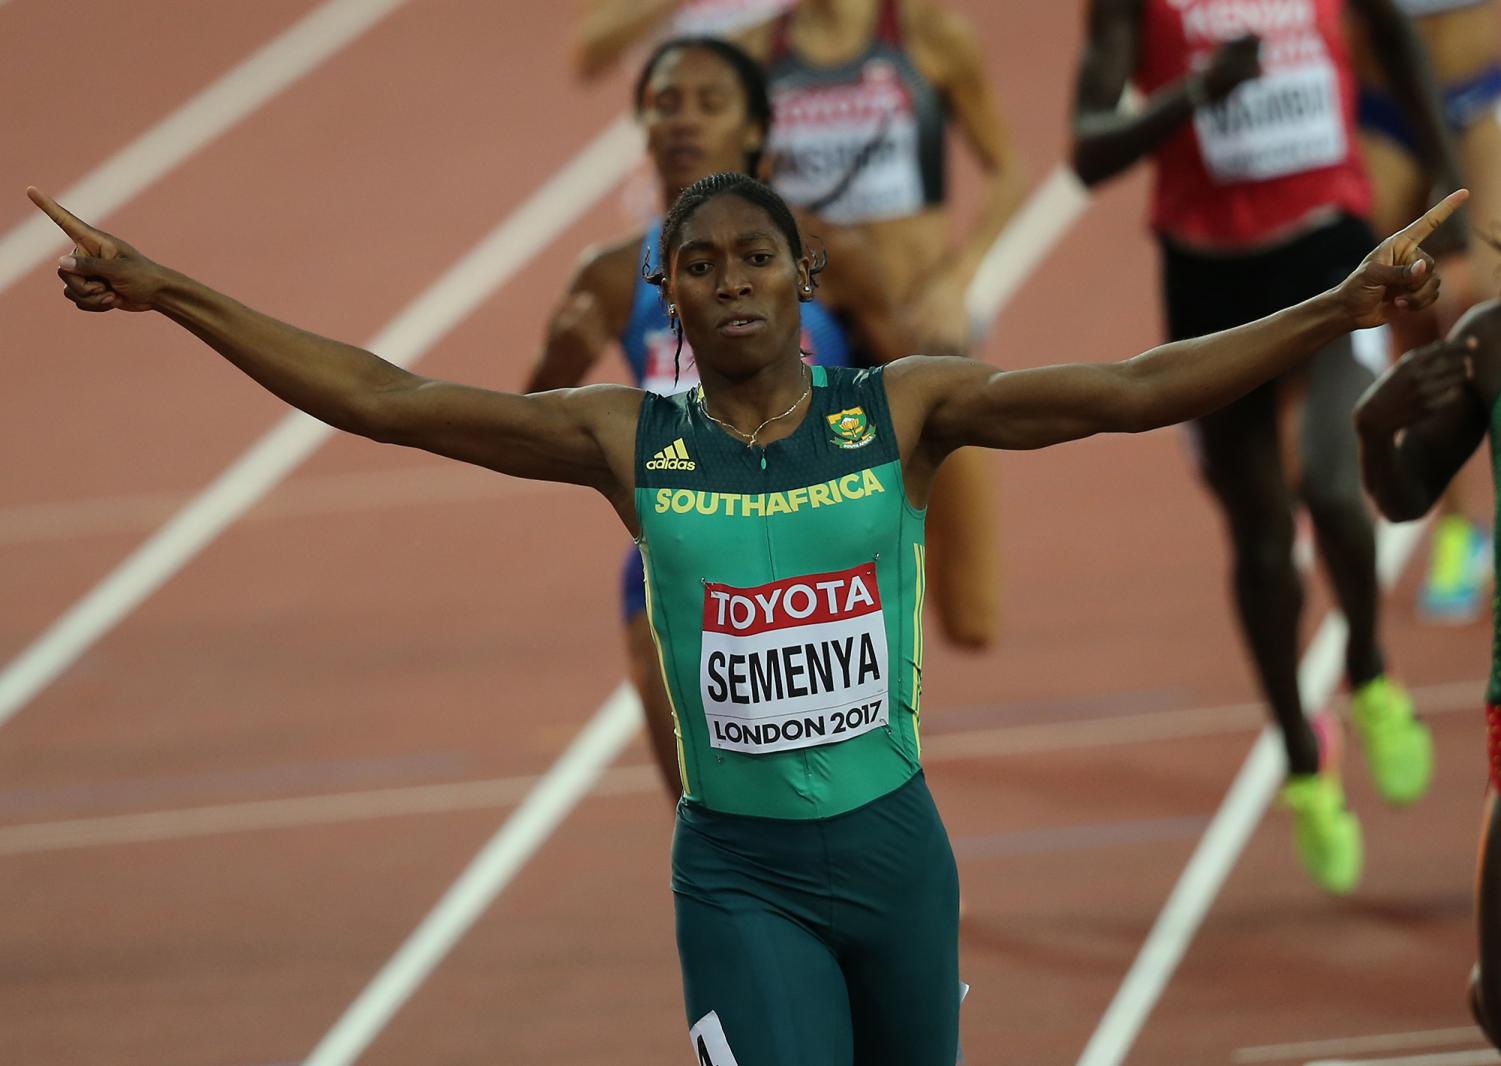 Caster+Semenya+of+South+Africa+wins+the+womens+800m+during+the+IAAF+World+Championships+at+London+Stadium+on+August+13%2C+2017.+